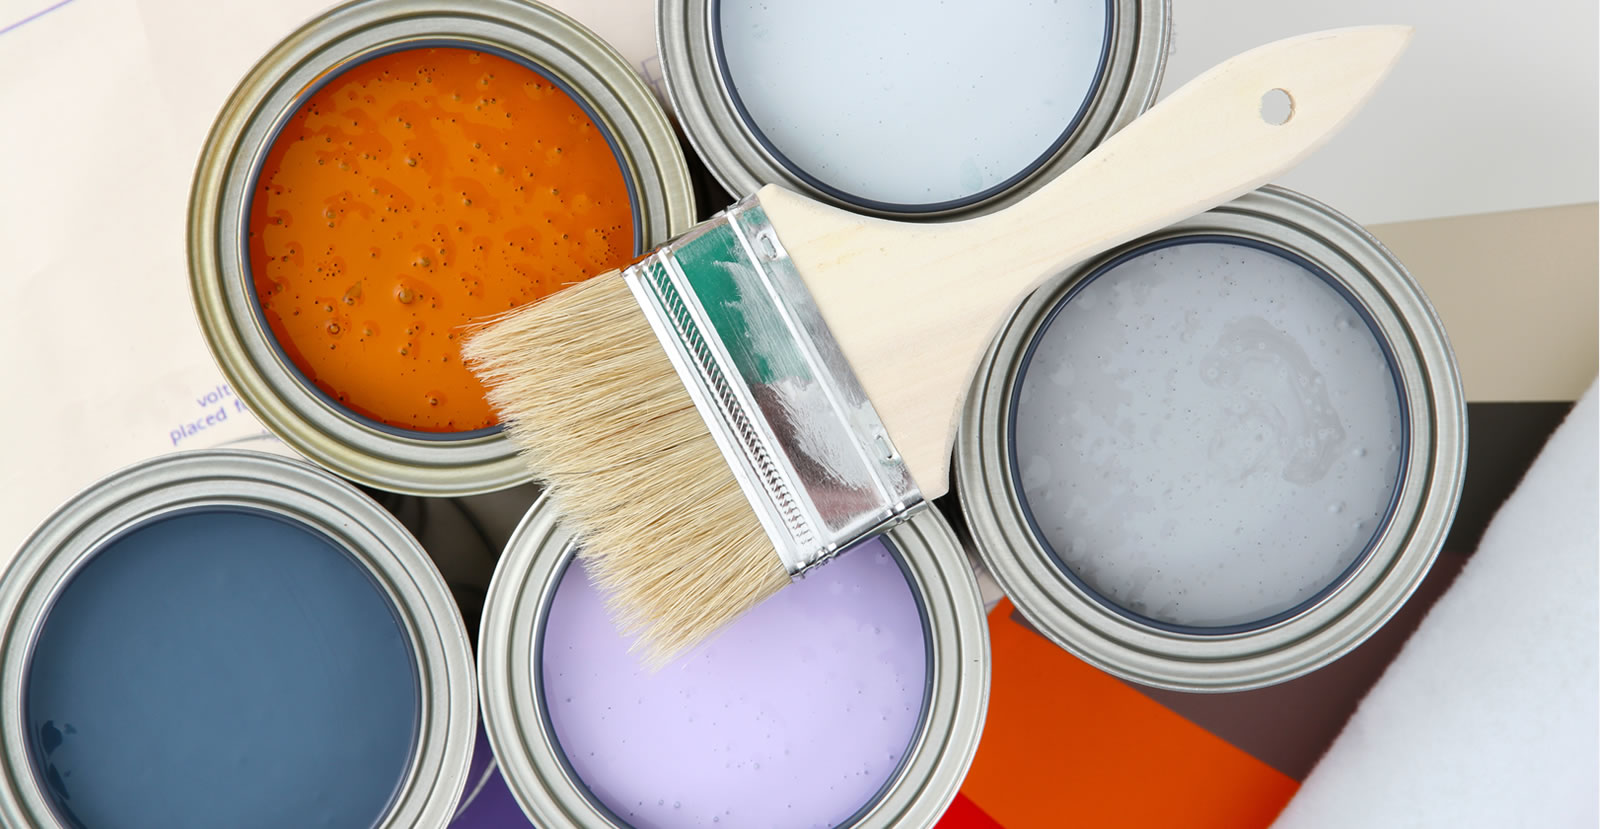 Close up image of a paintbrush resting on top of some paint cans